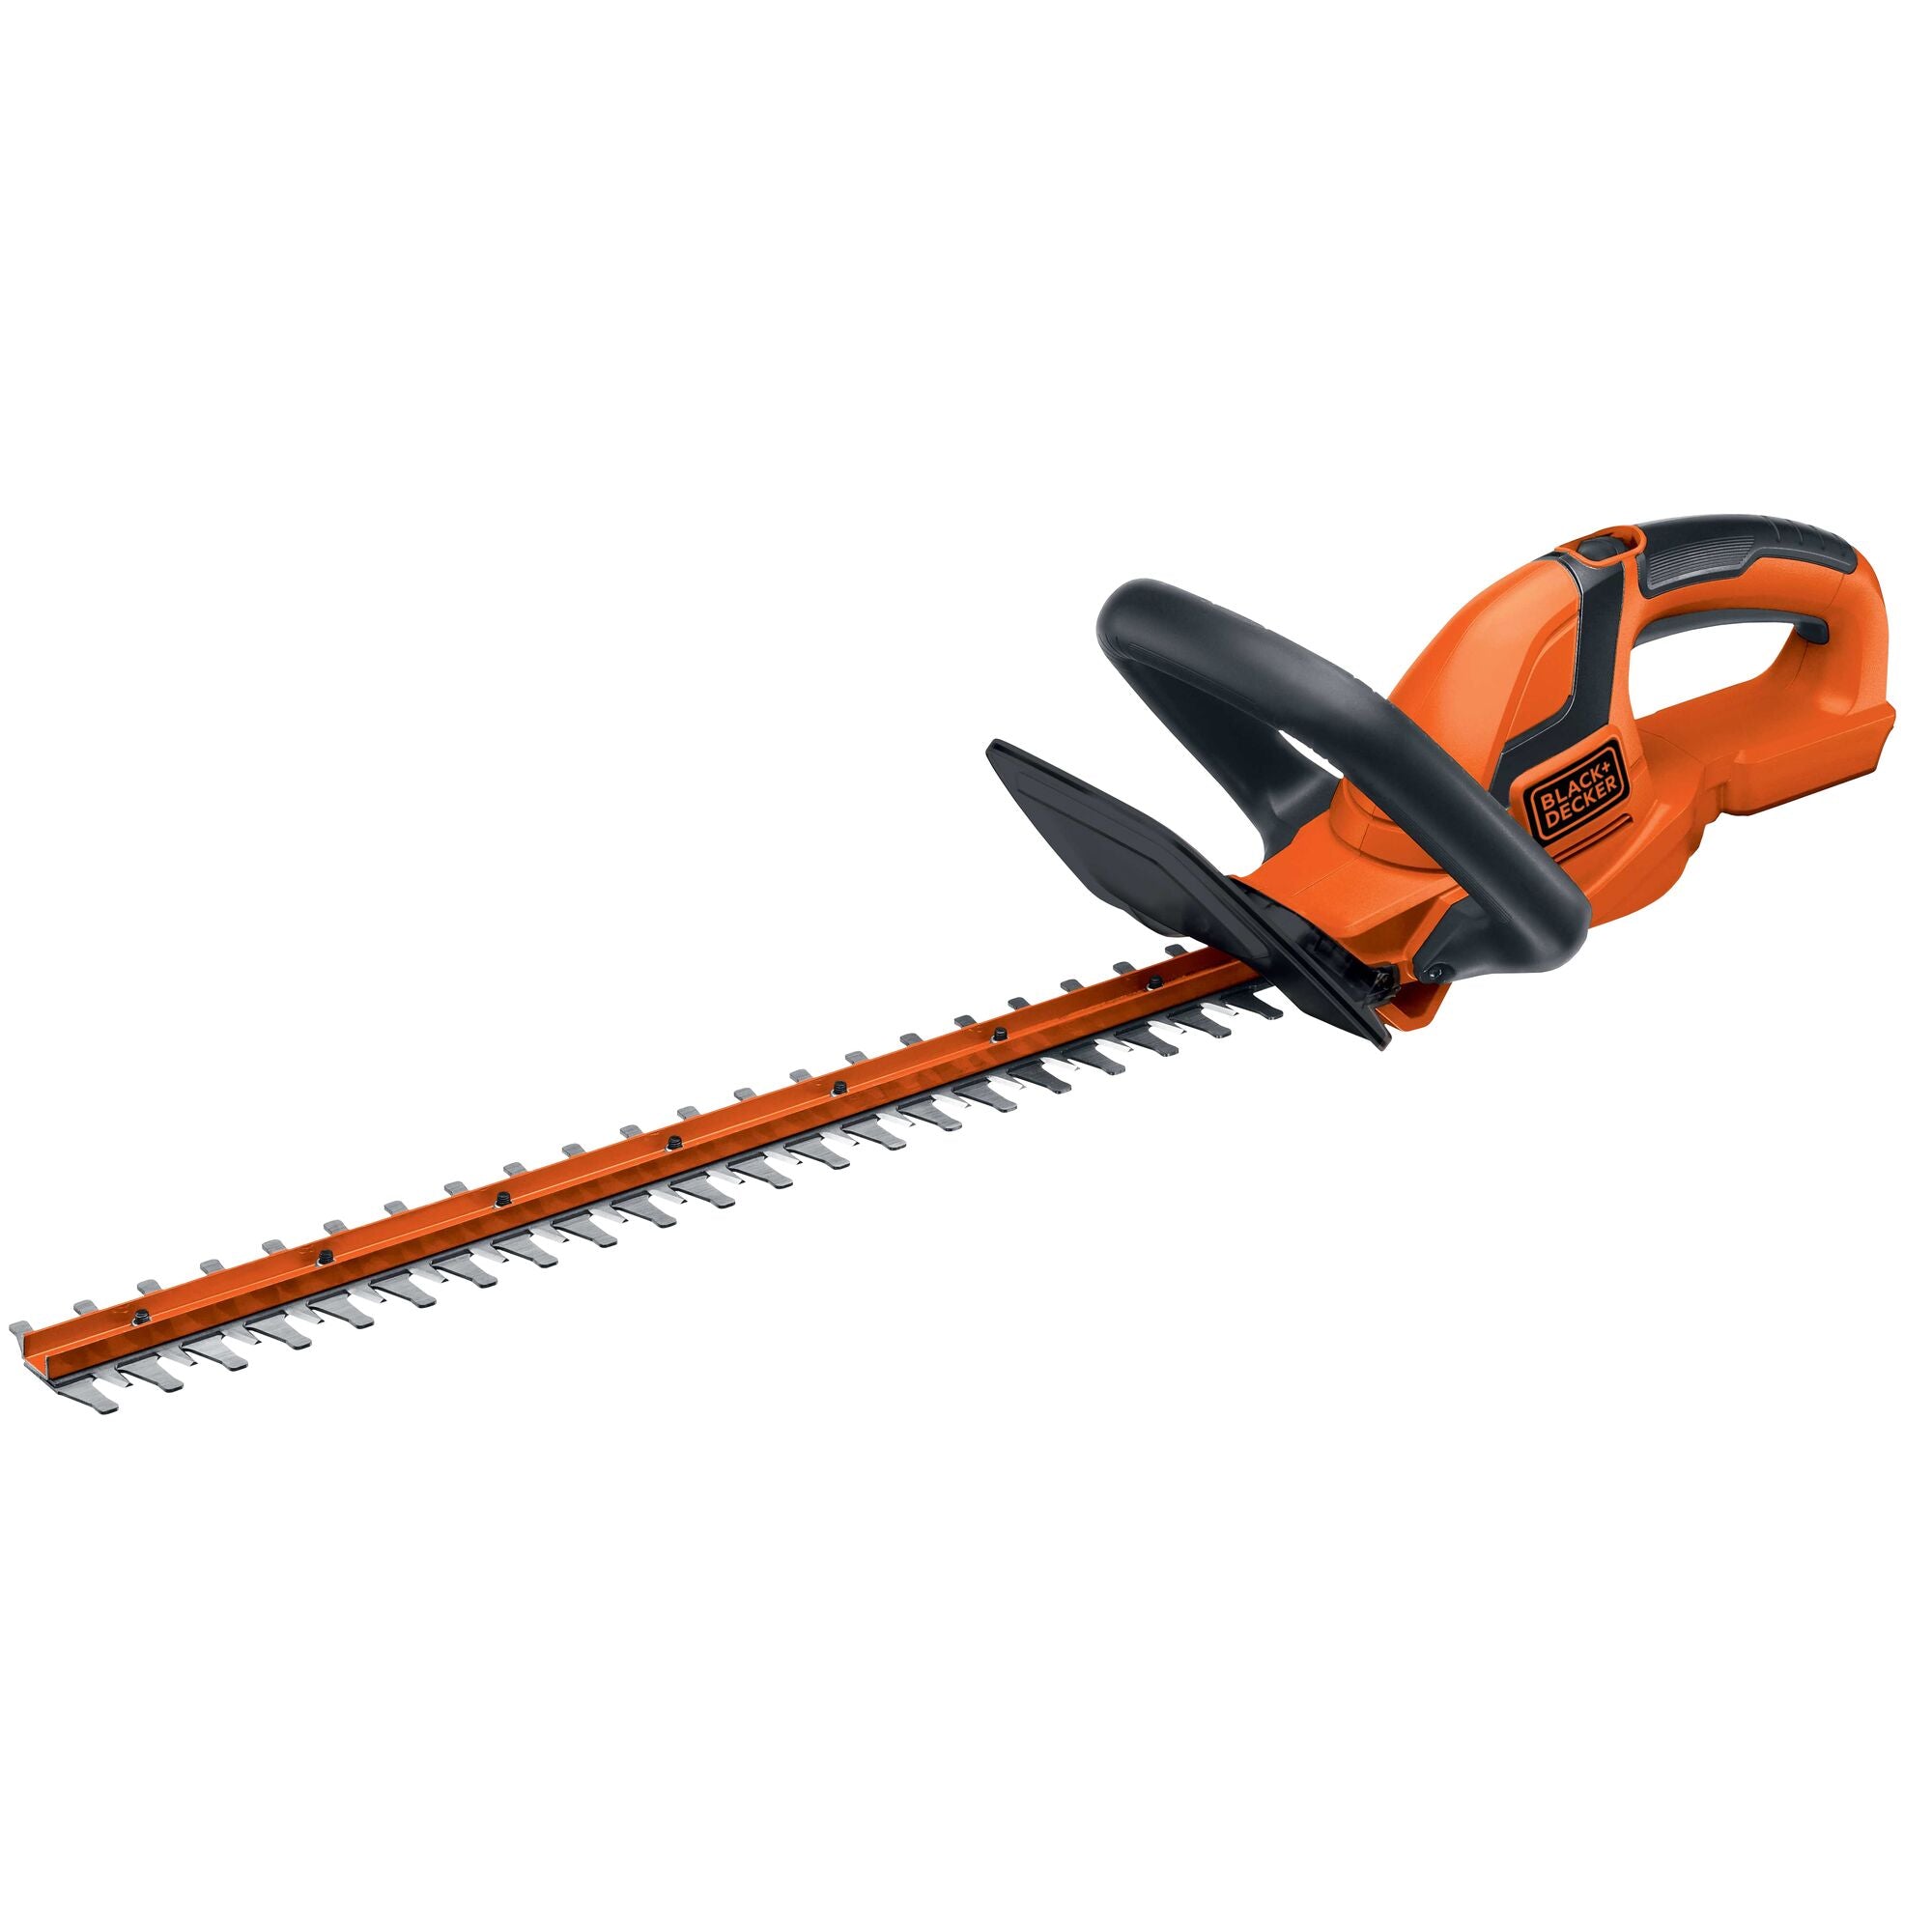 Black & Decker Lawn Tools - Tools In Action - Power Tool Reviews